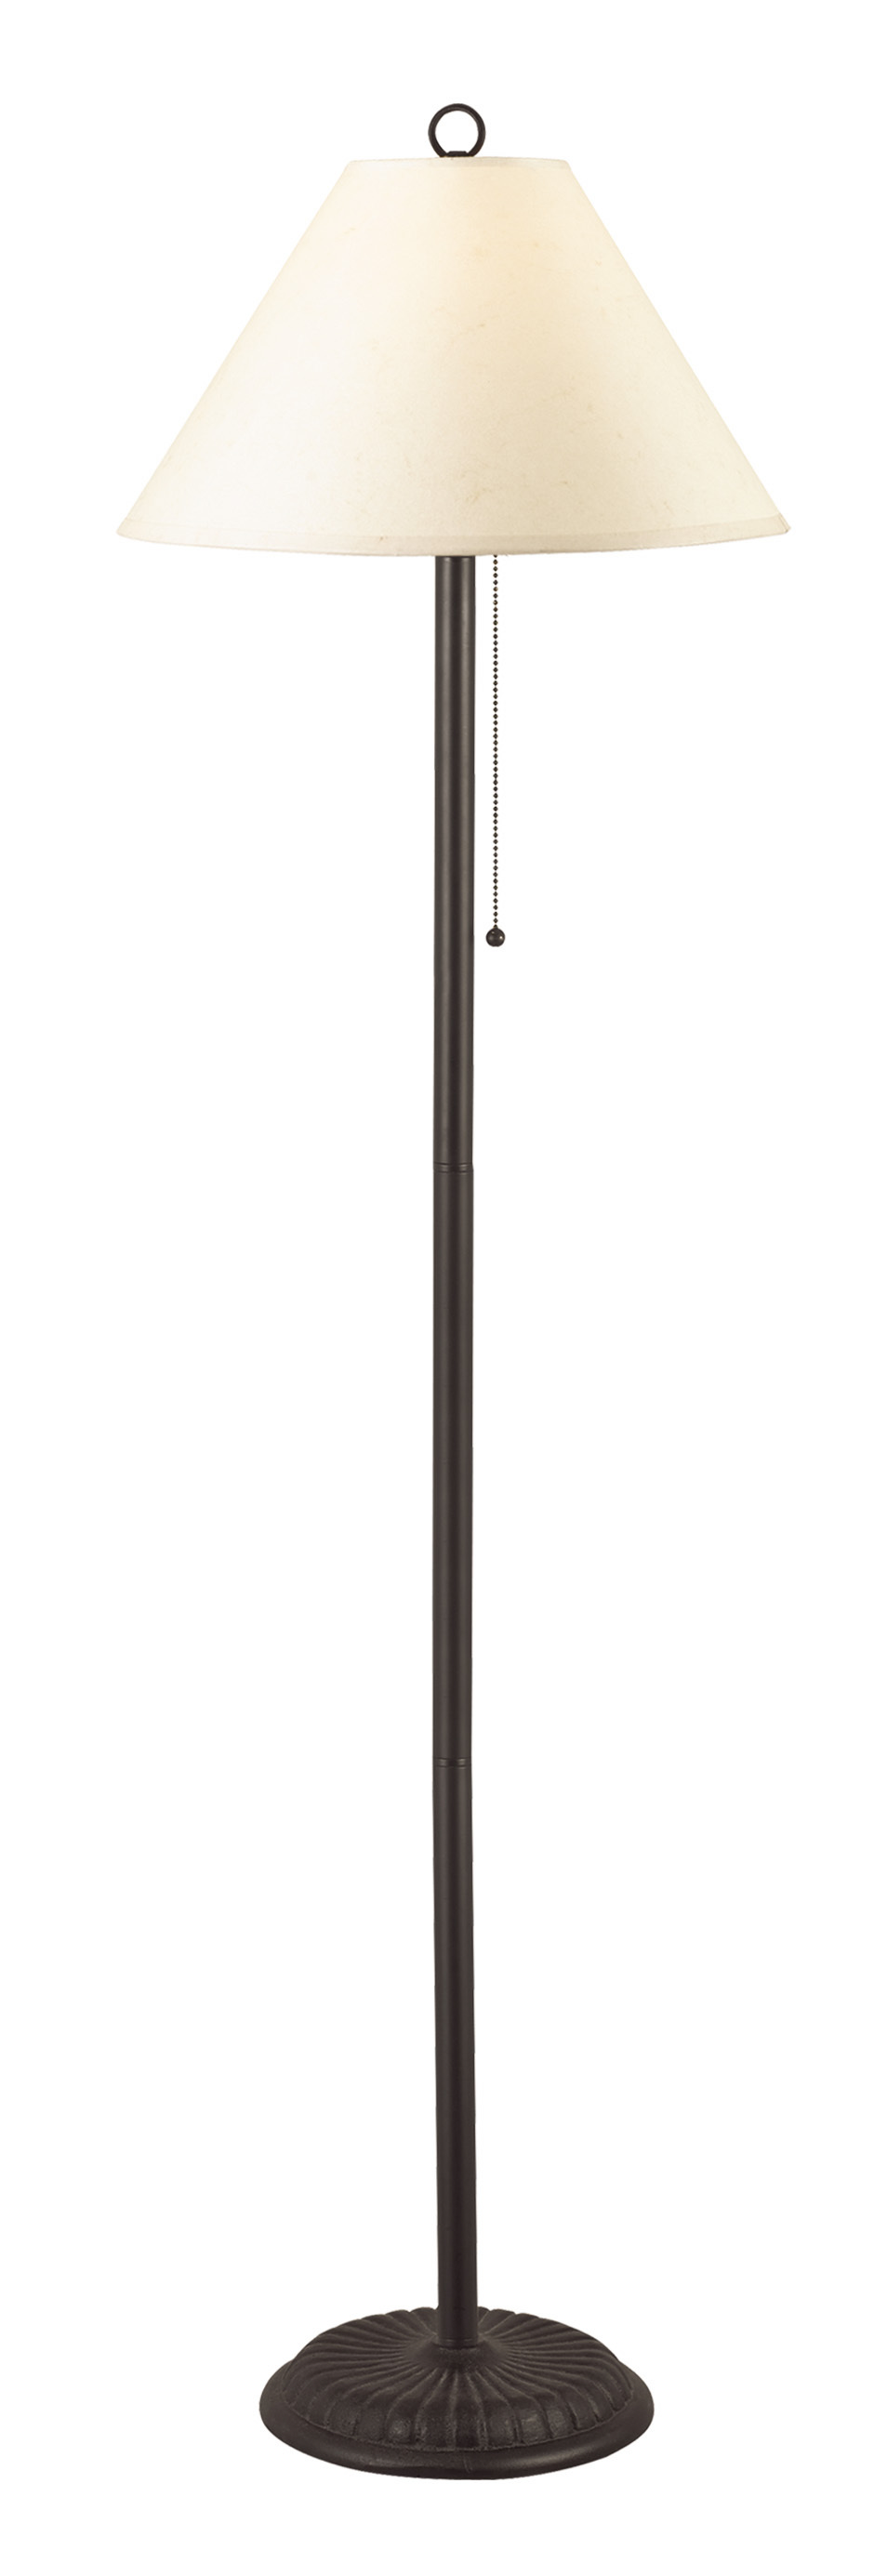 100W Candlestick Floor Lamp W/Pull Chain Switch